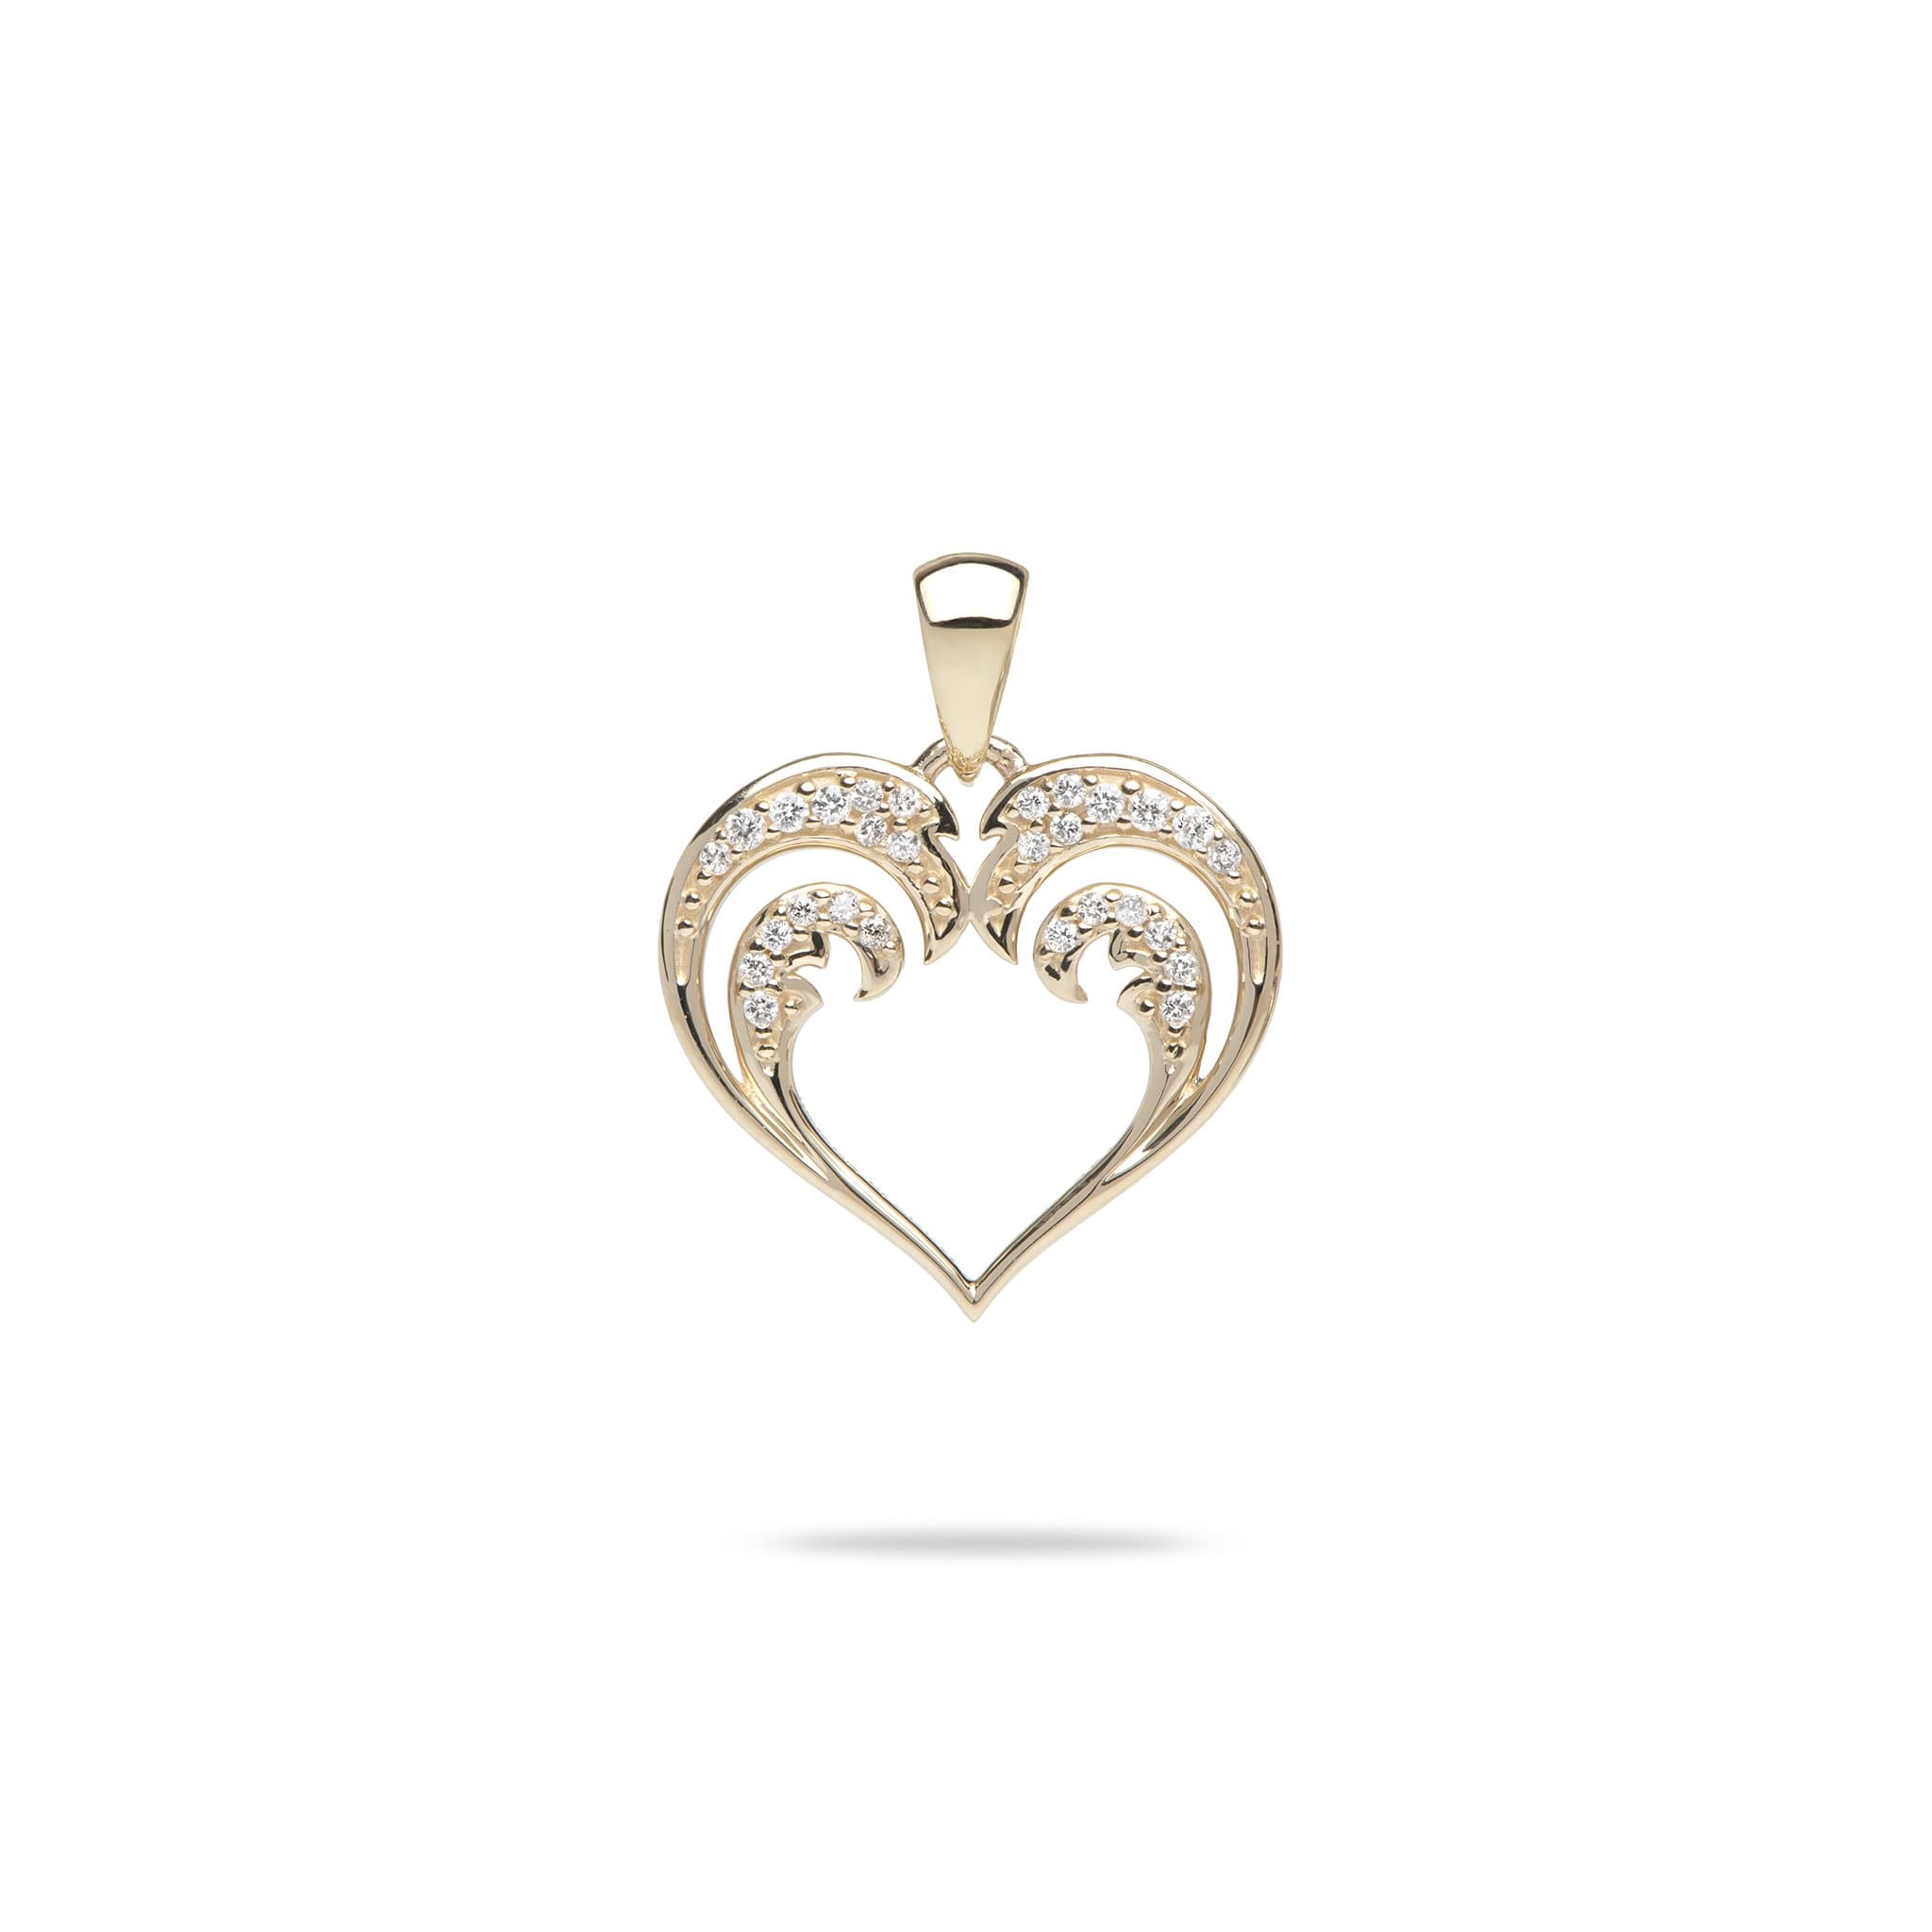 Nalu Heart Pendant in Gold with Diamonds - 15mm-Maui Divers Jewelry